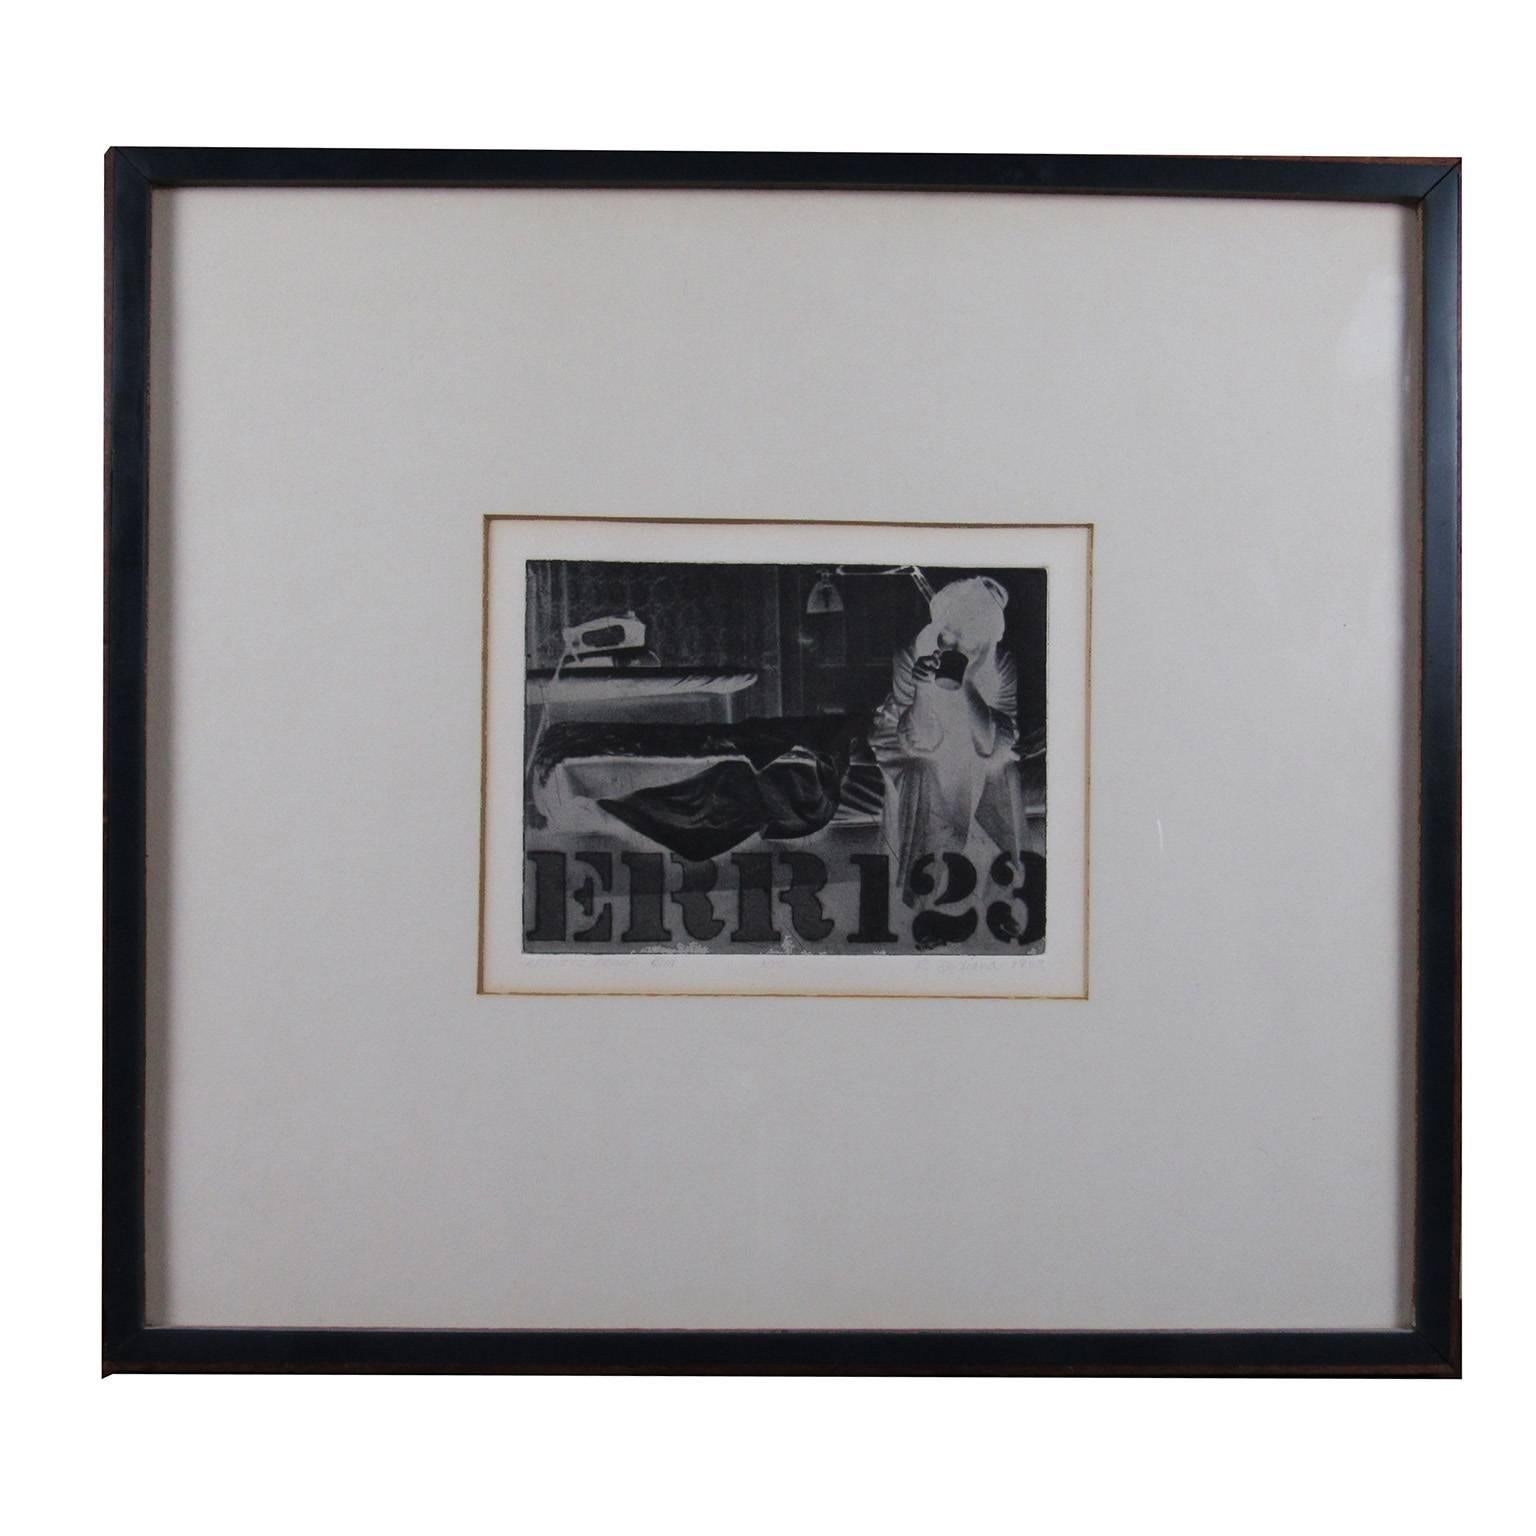 Robert Indiana (American, b. 1928)
ERR 123
Etching with photogravure
Signed and dated R. Indiana 1963 lower right, Inscribed Artist Proof E/M lower left. Dedicated on back: My Best Many Thanks, Eleanor, Elmer, RI'64, bears Dain/Schiff label on